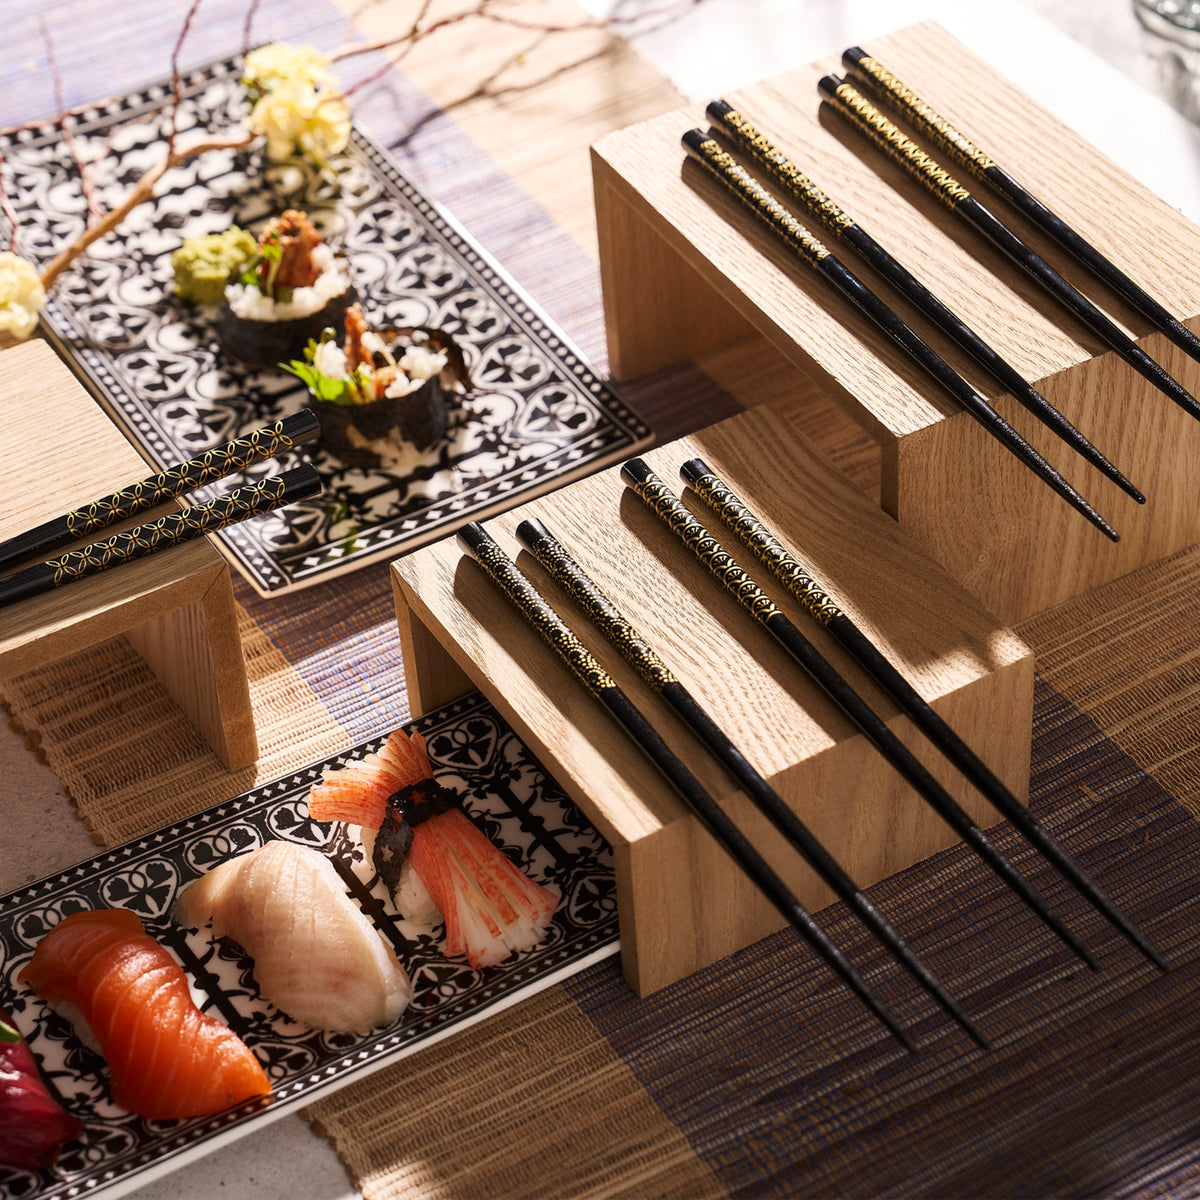 Lacquered wooden tray with Osaka Chopsticks featuring gold patterns by Miya, Inc.